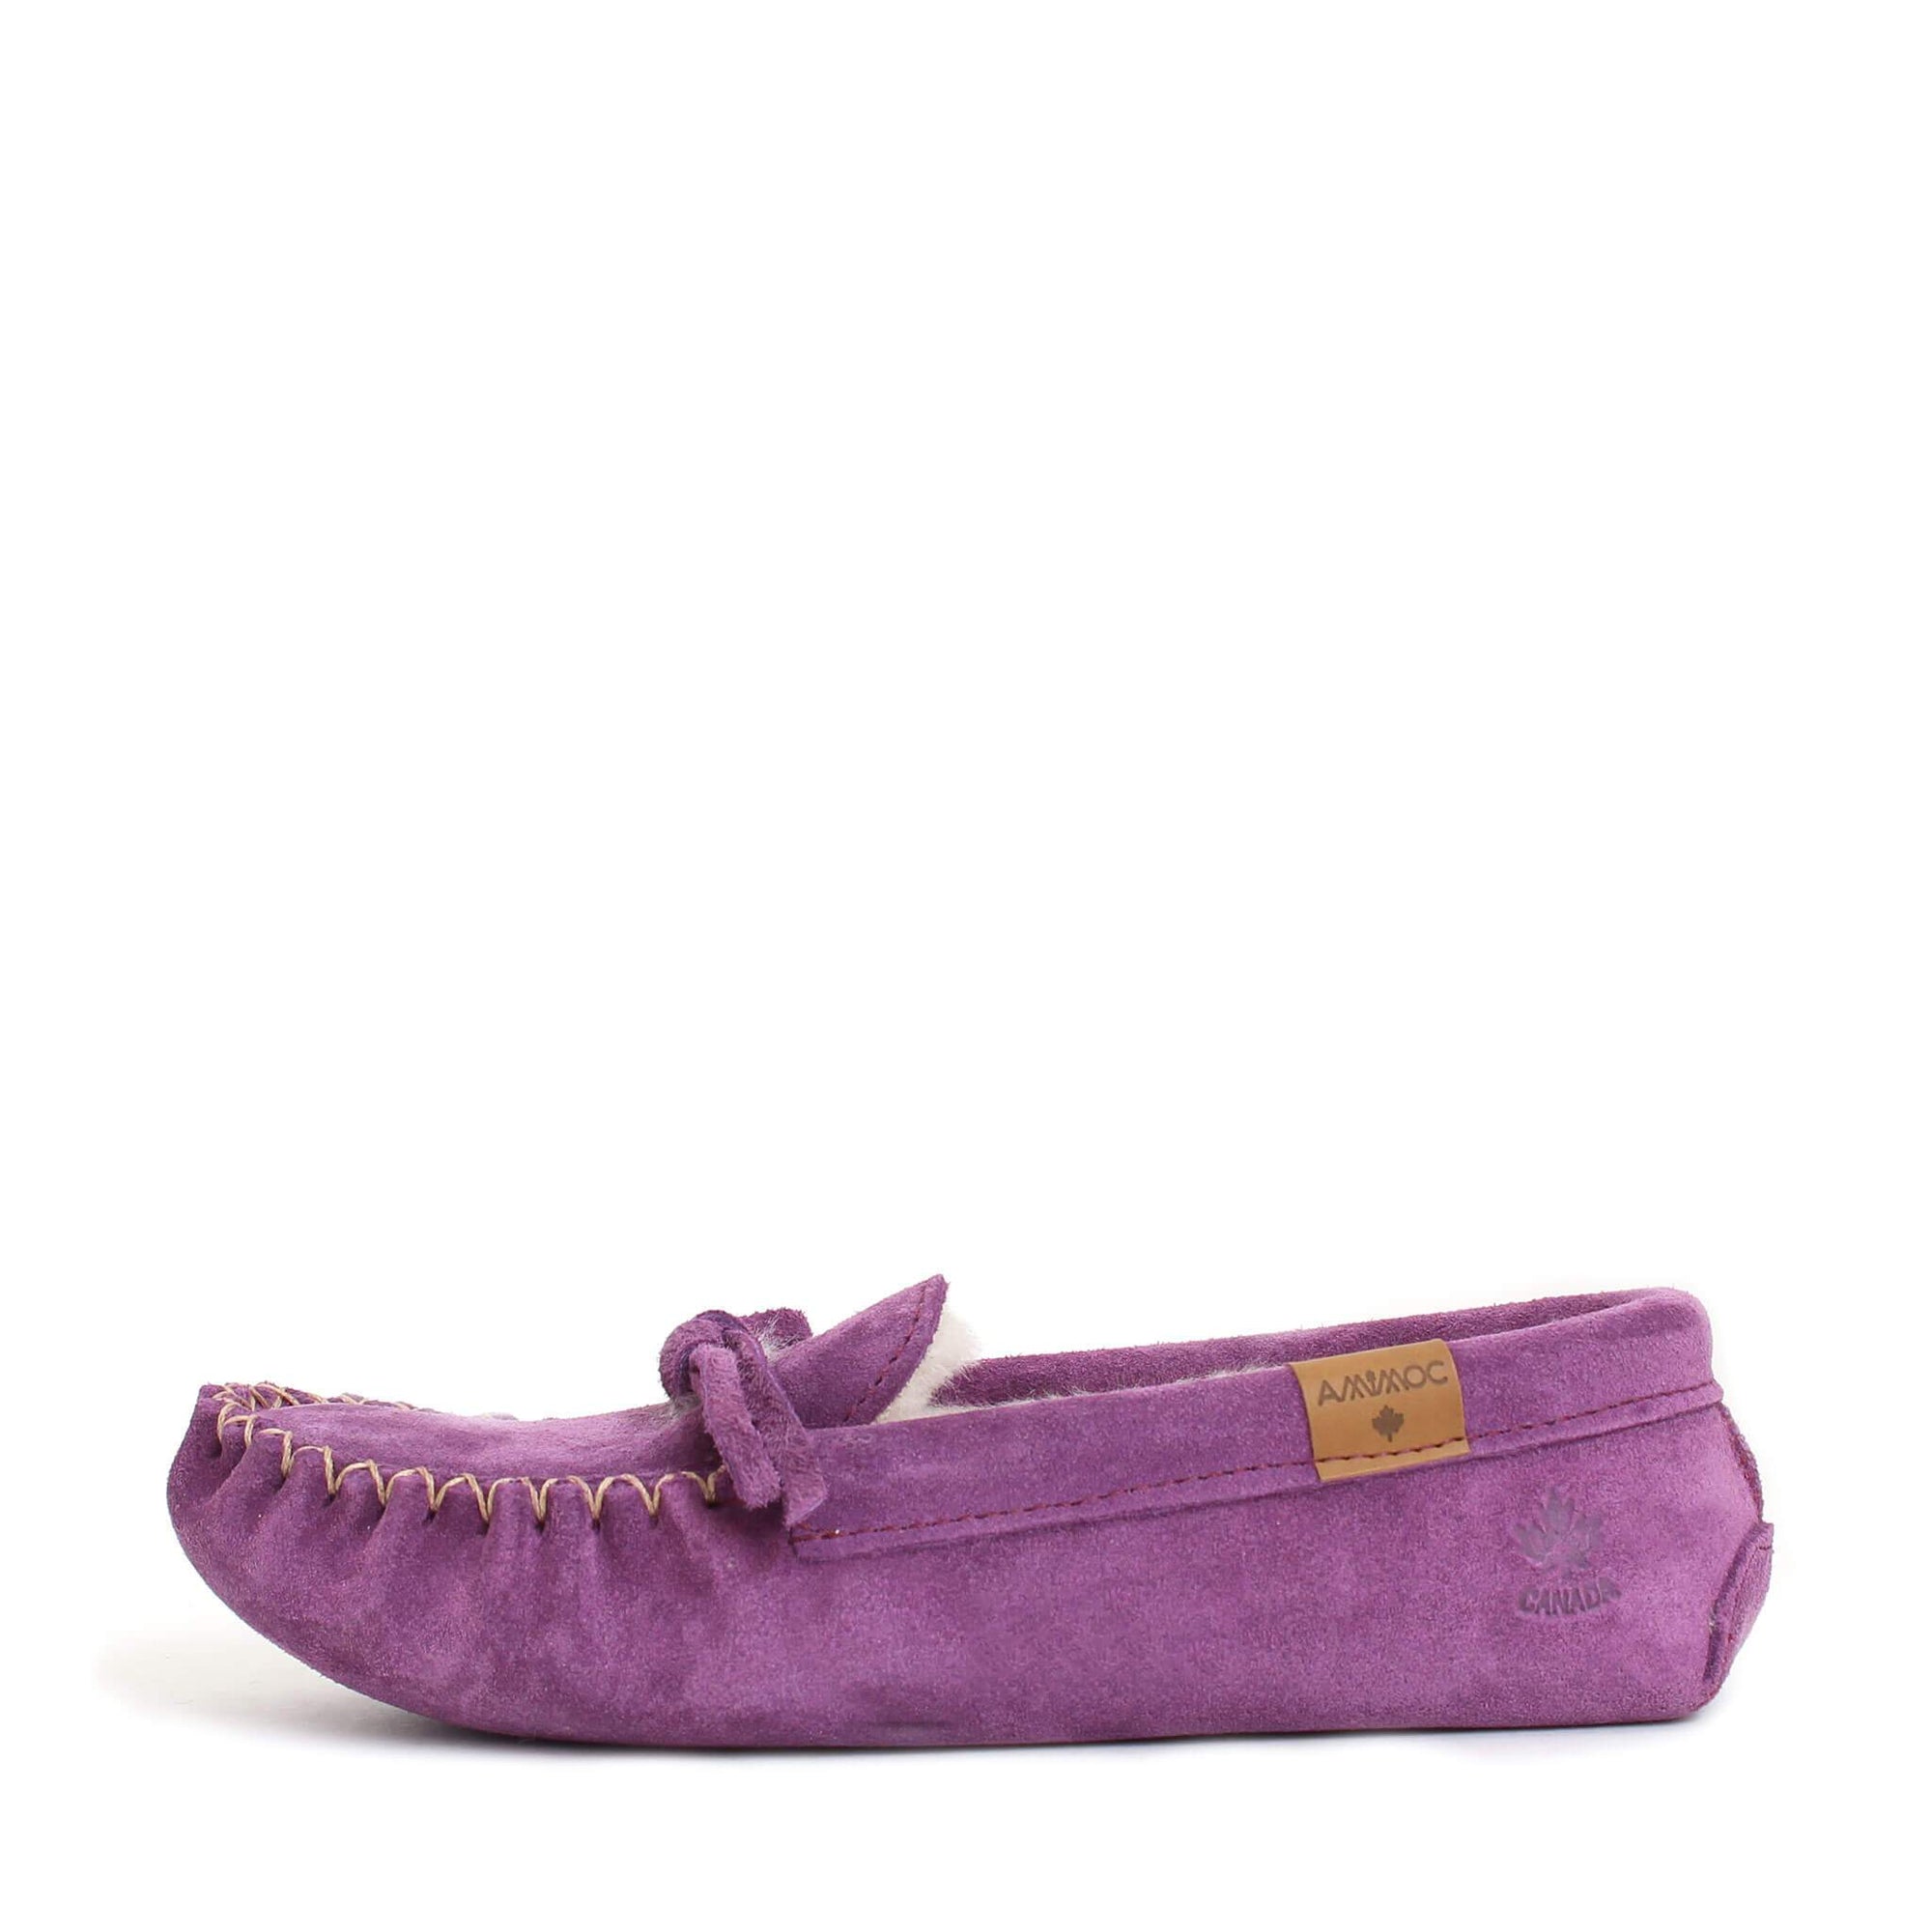 Istah Moccasin for Women - Orchid 